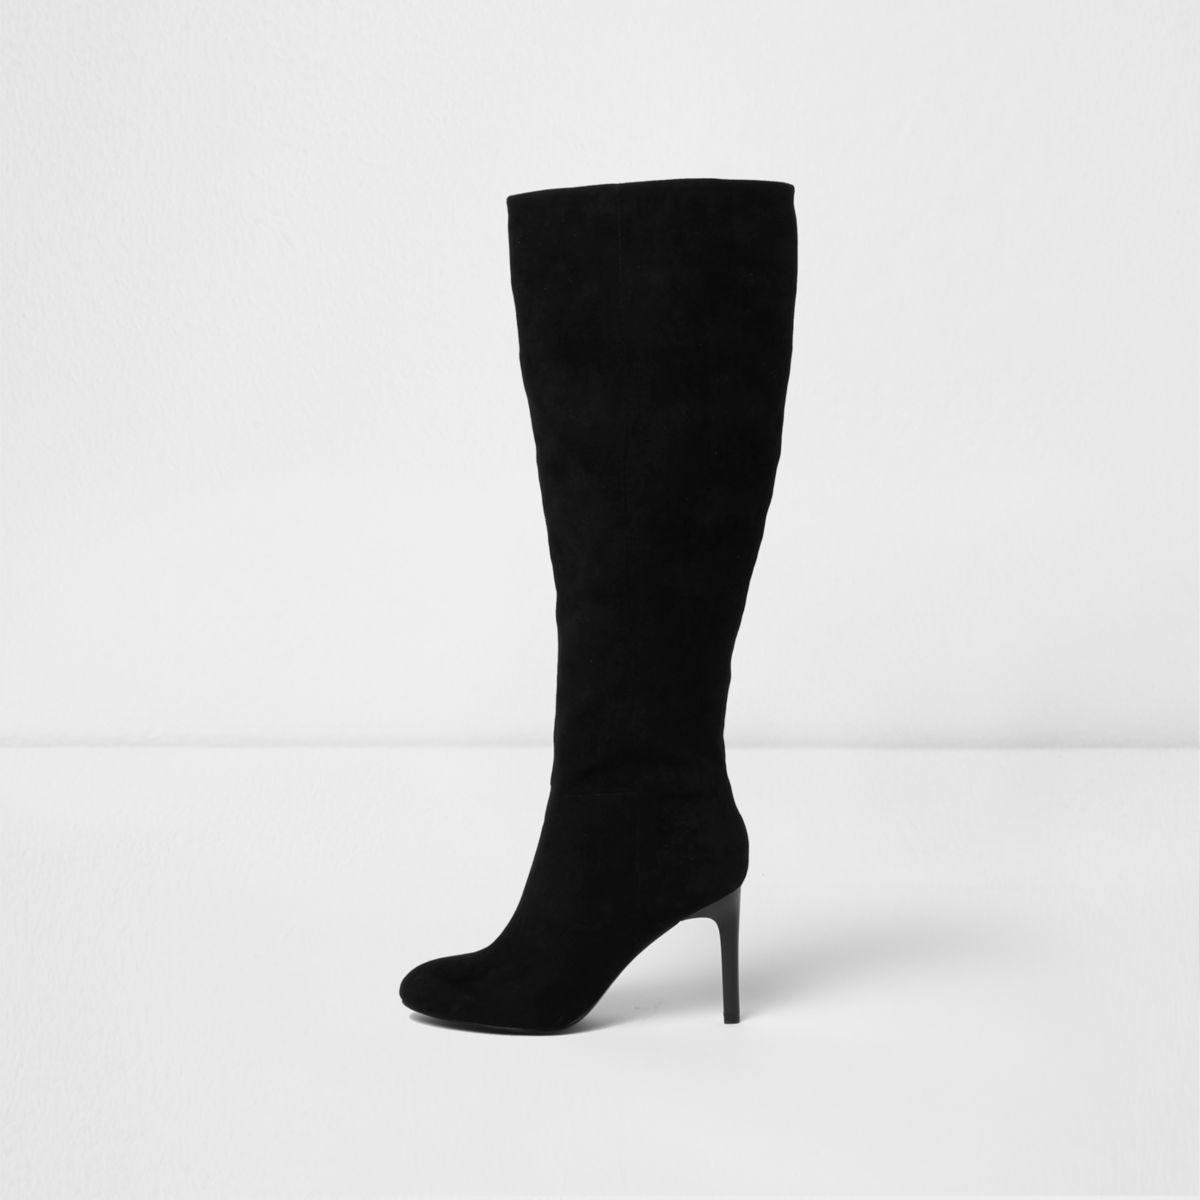 Black Suede Boots Stiletto Heel Calf Length Boots|FSJshoes